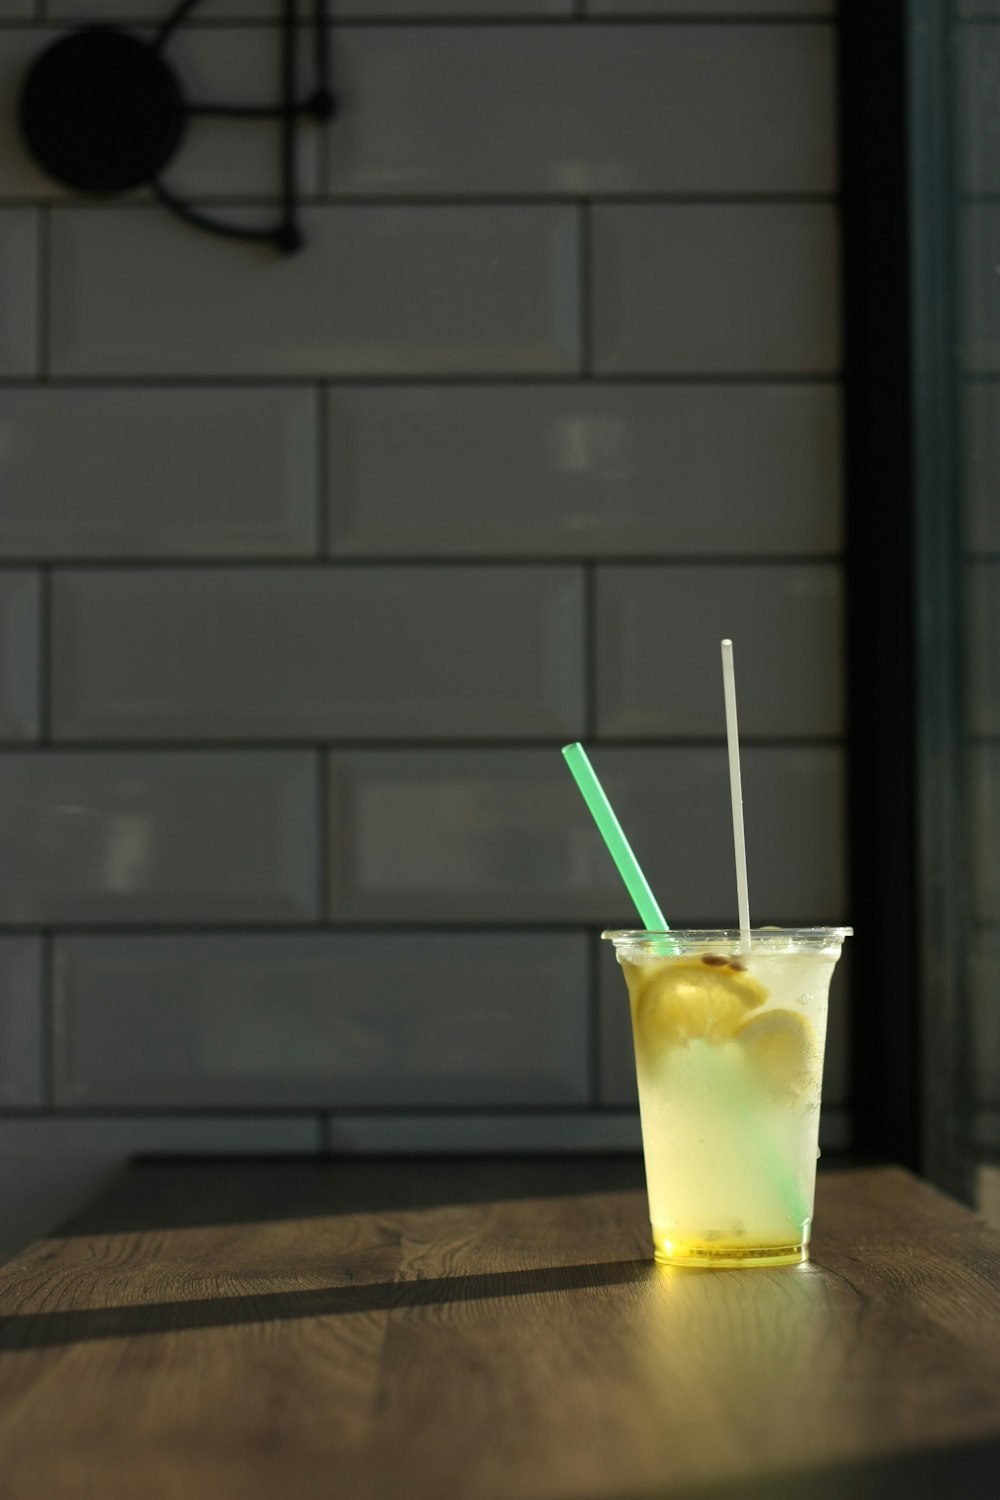 clear drinking glass with yellow liquid and green straw